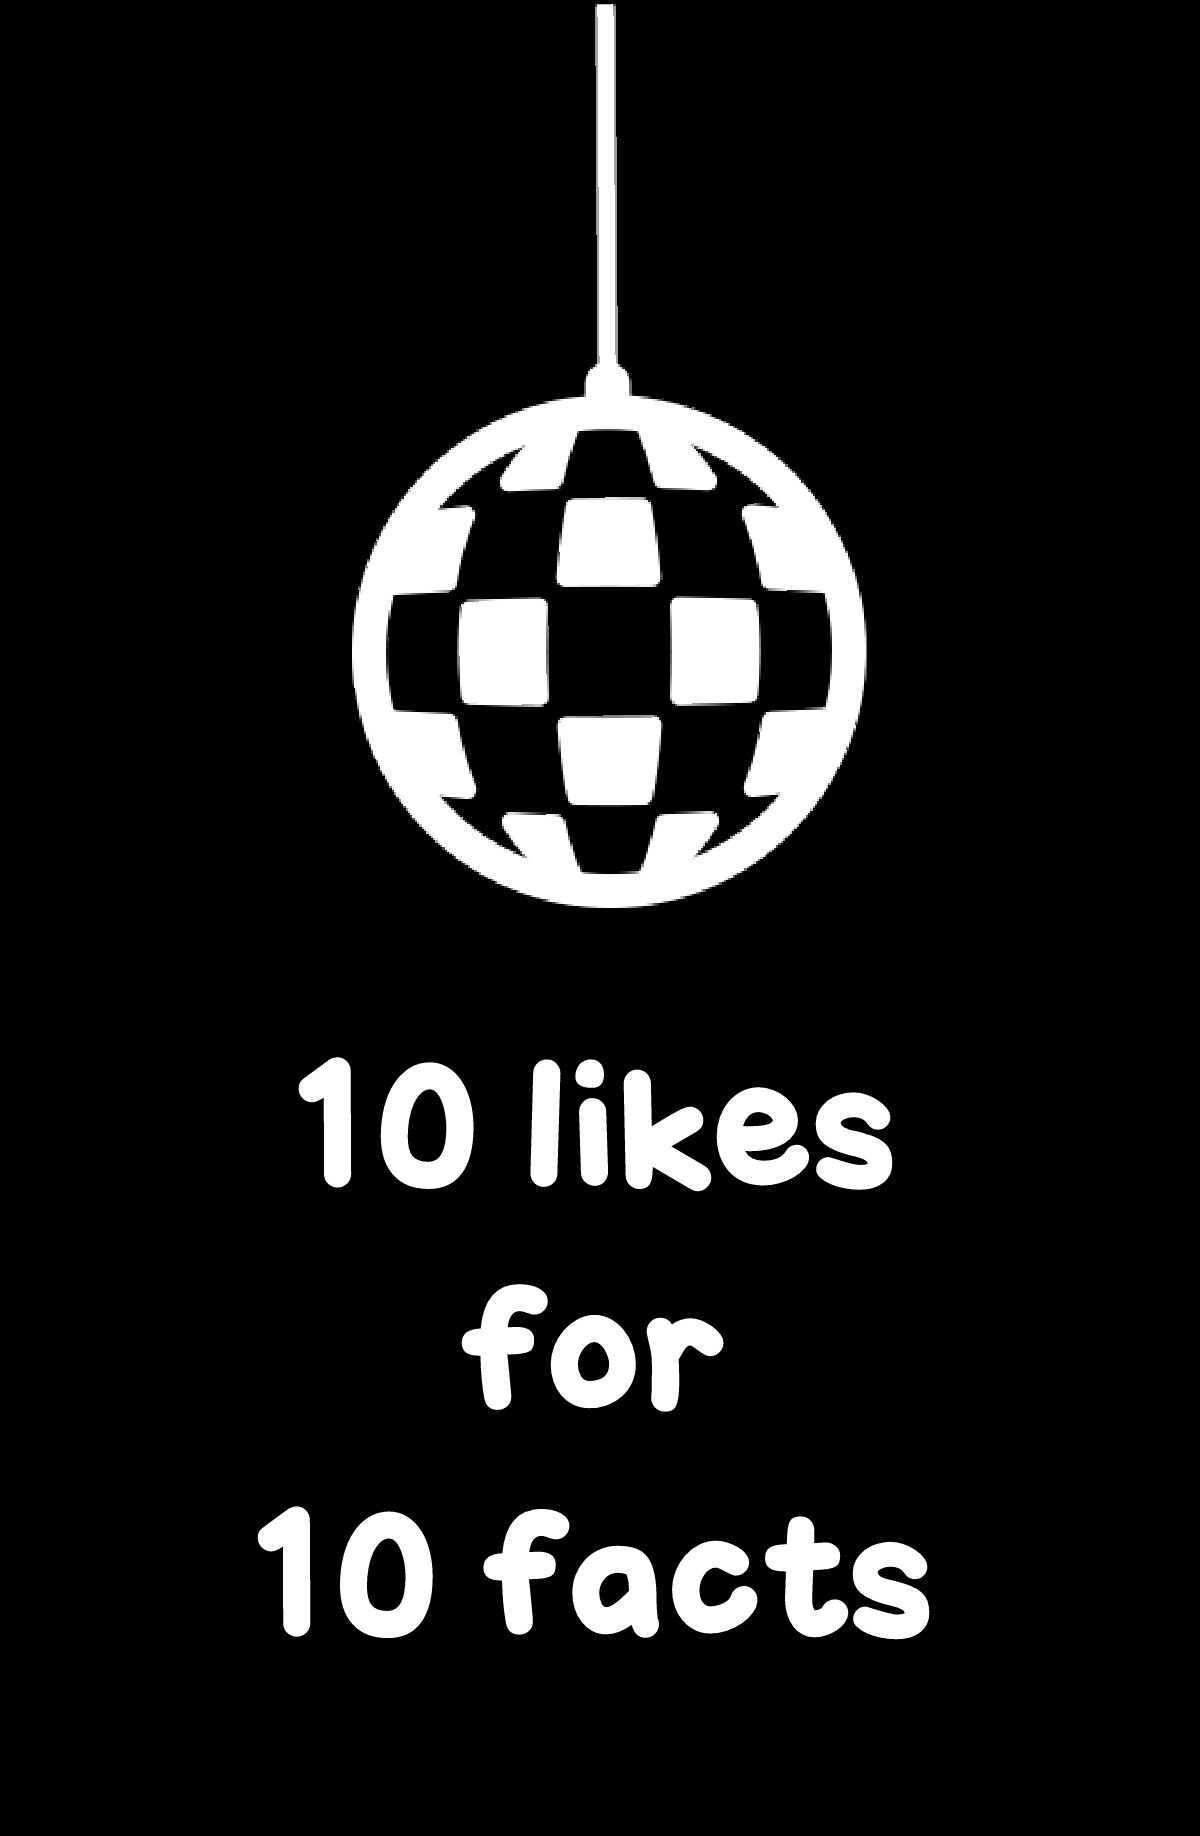 10 likes 
for 
10 facts